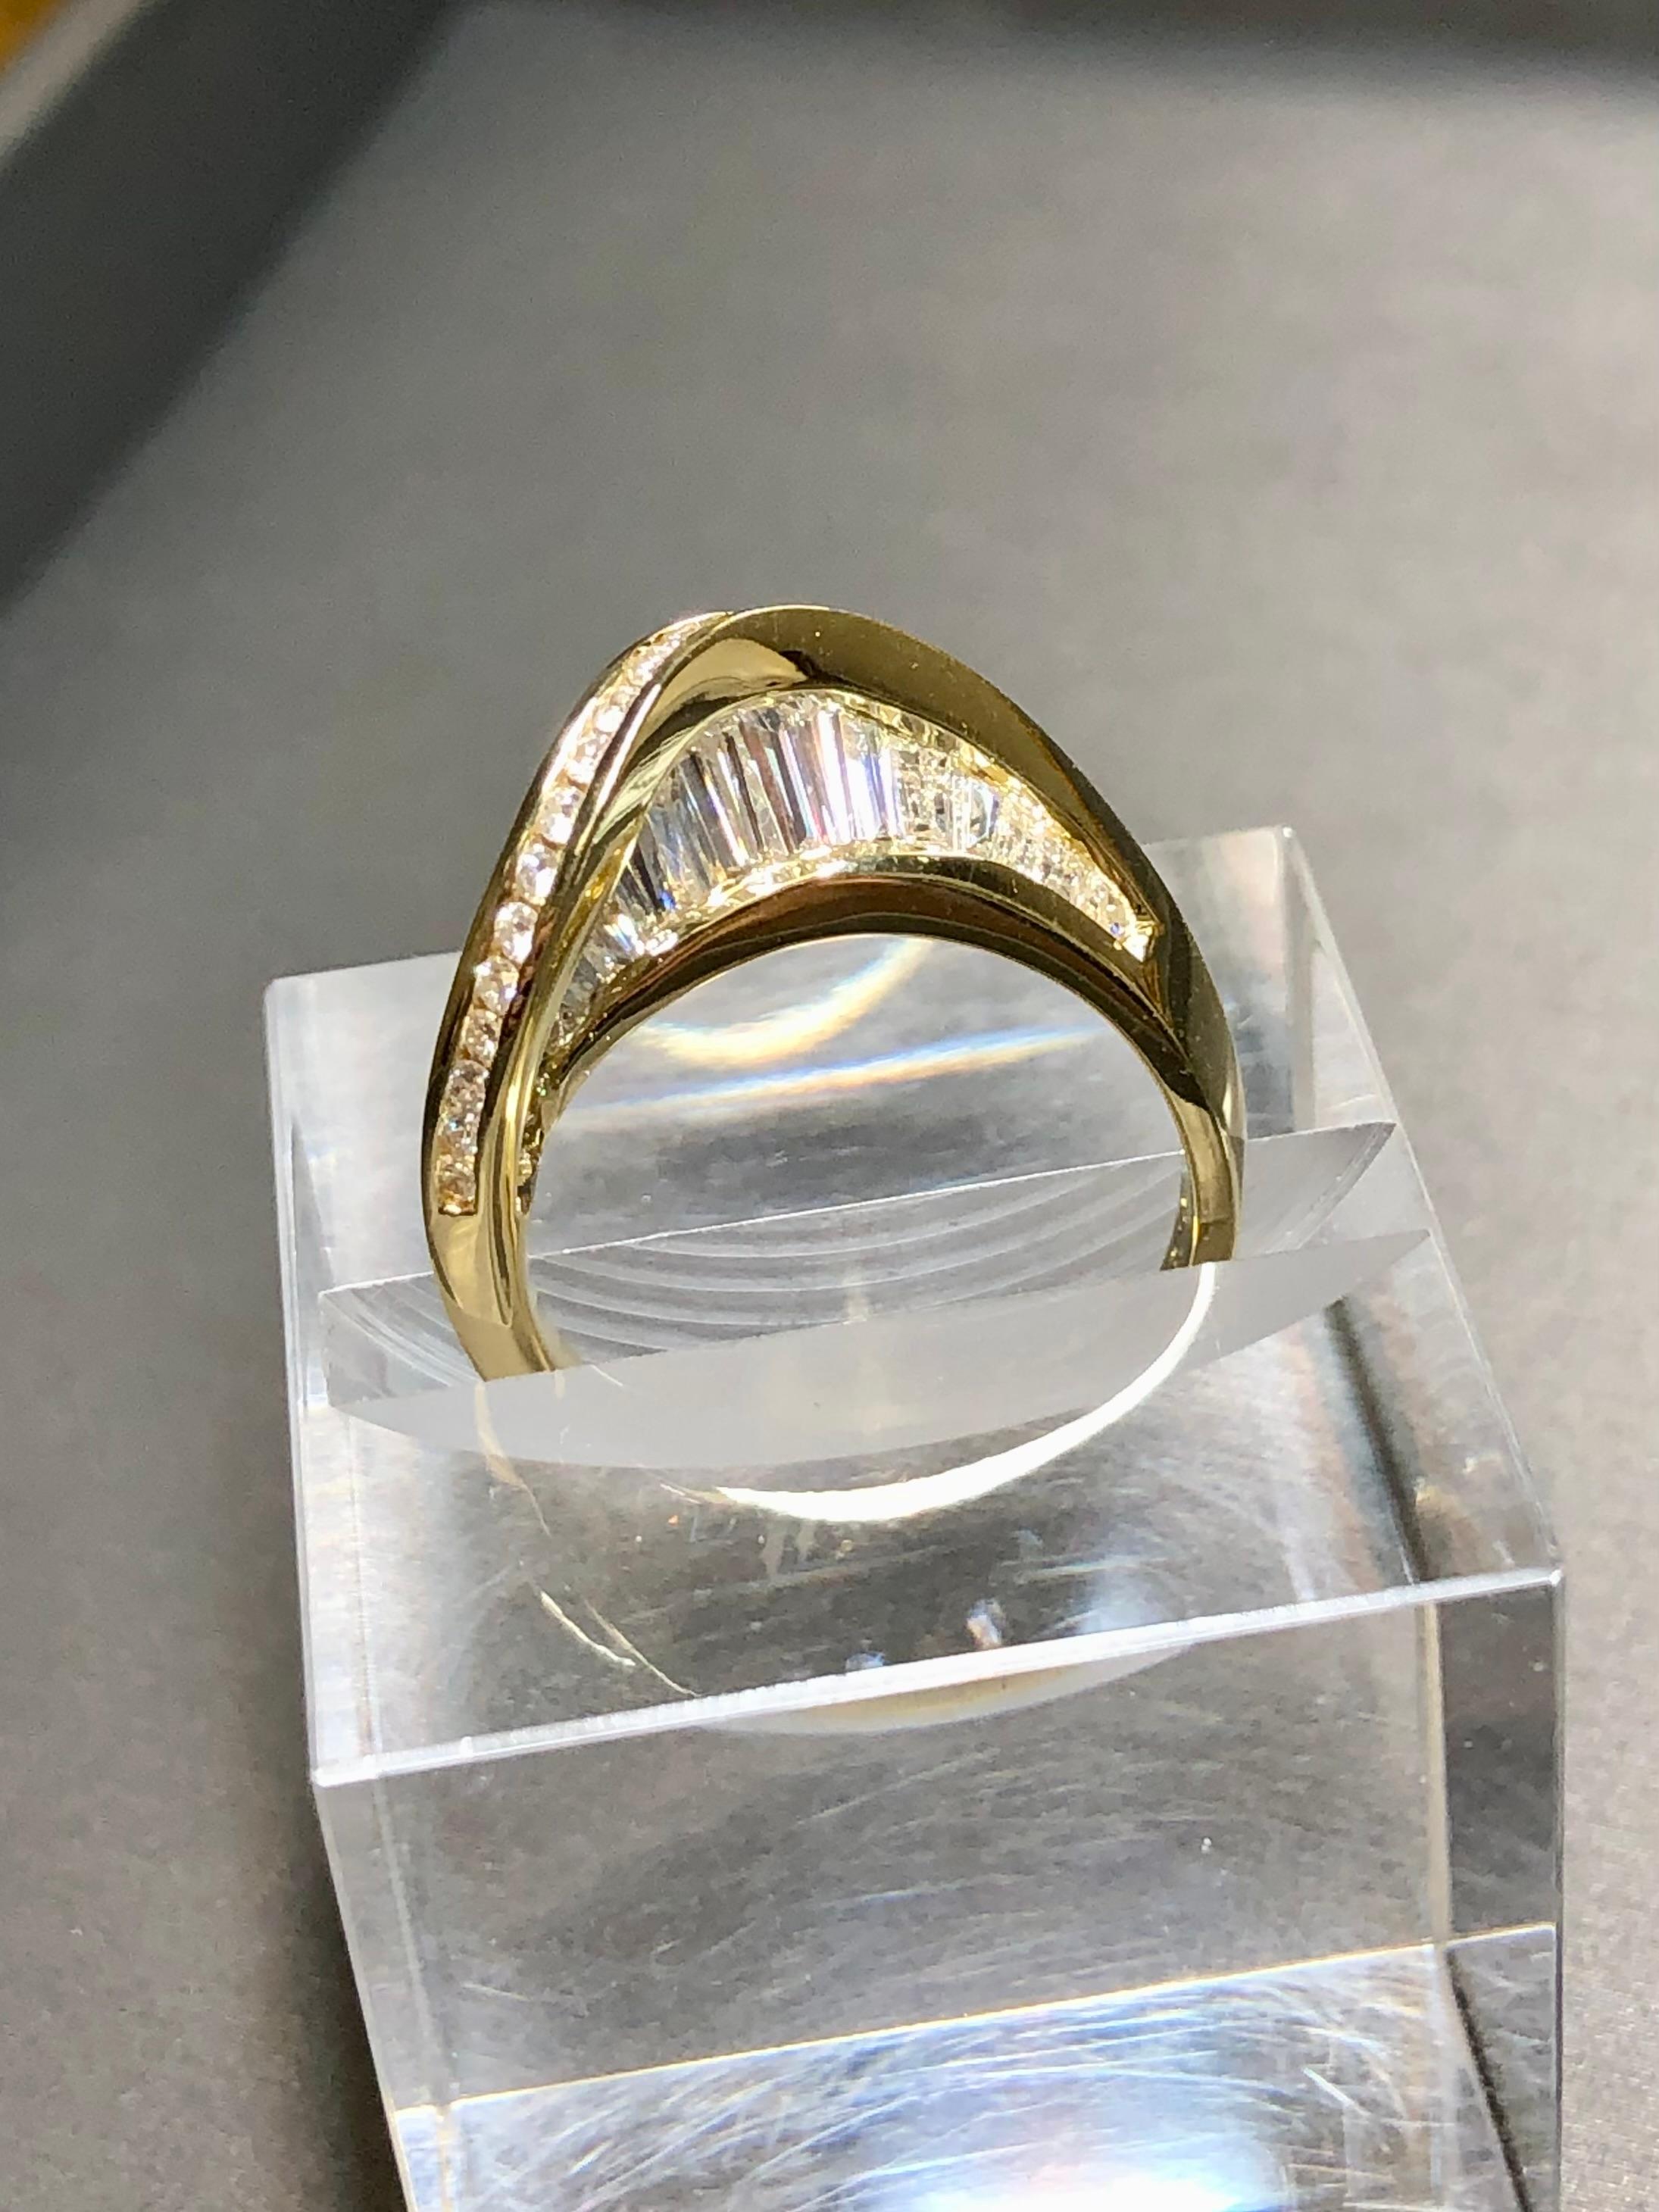 
A uniquely designed and well executed cocktail ring done in 18K yellow gold by NOVA STYLES and set with approximately 2cttw in round and tapered baguette diamonds. All stones are a matching G-H color and Vs1+ clarity.


Dimensions/Weight:

Ring